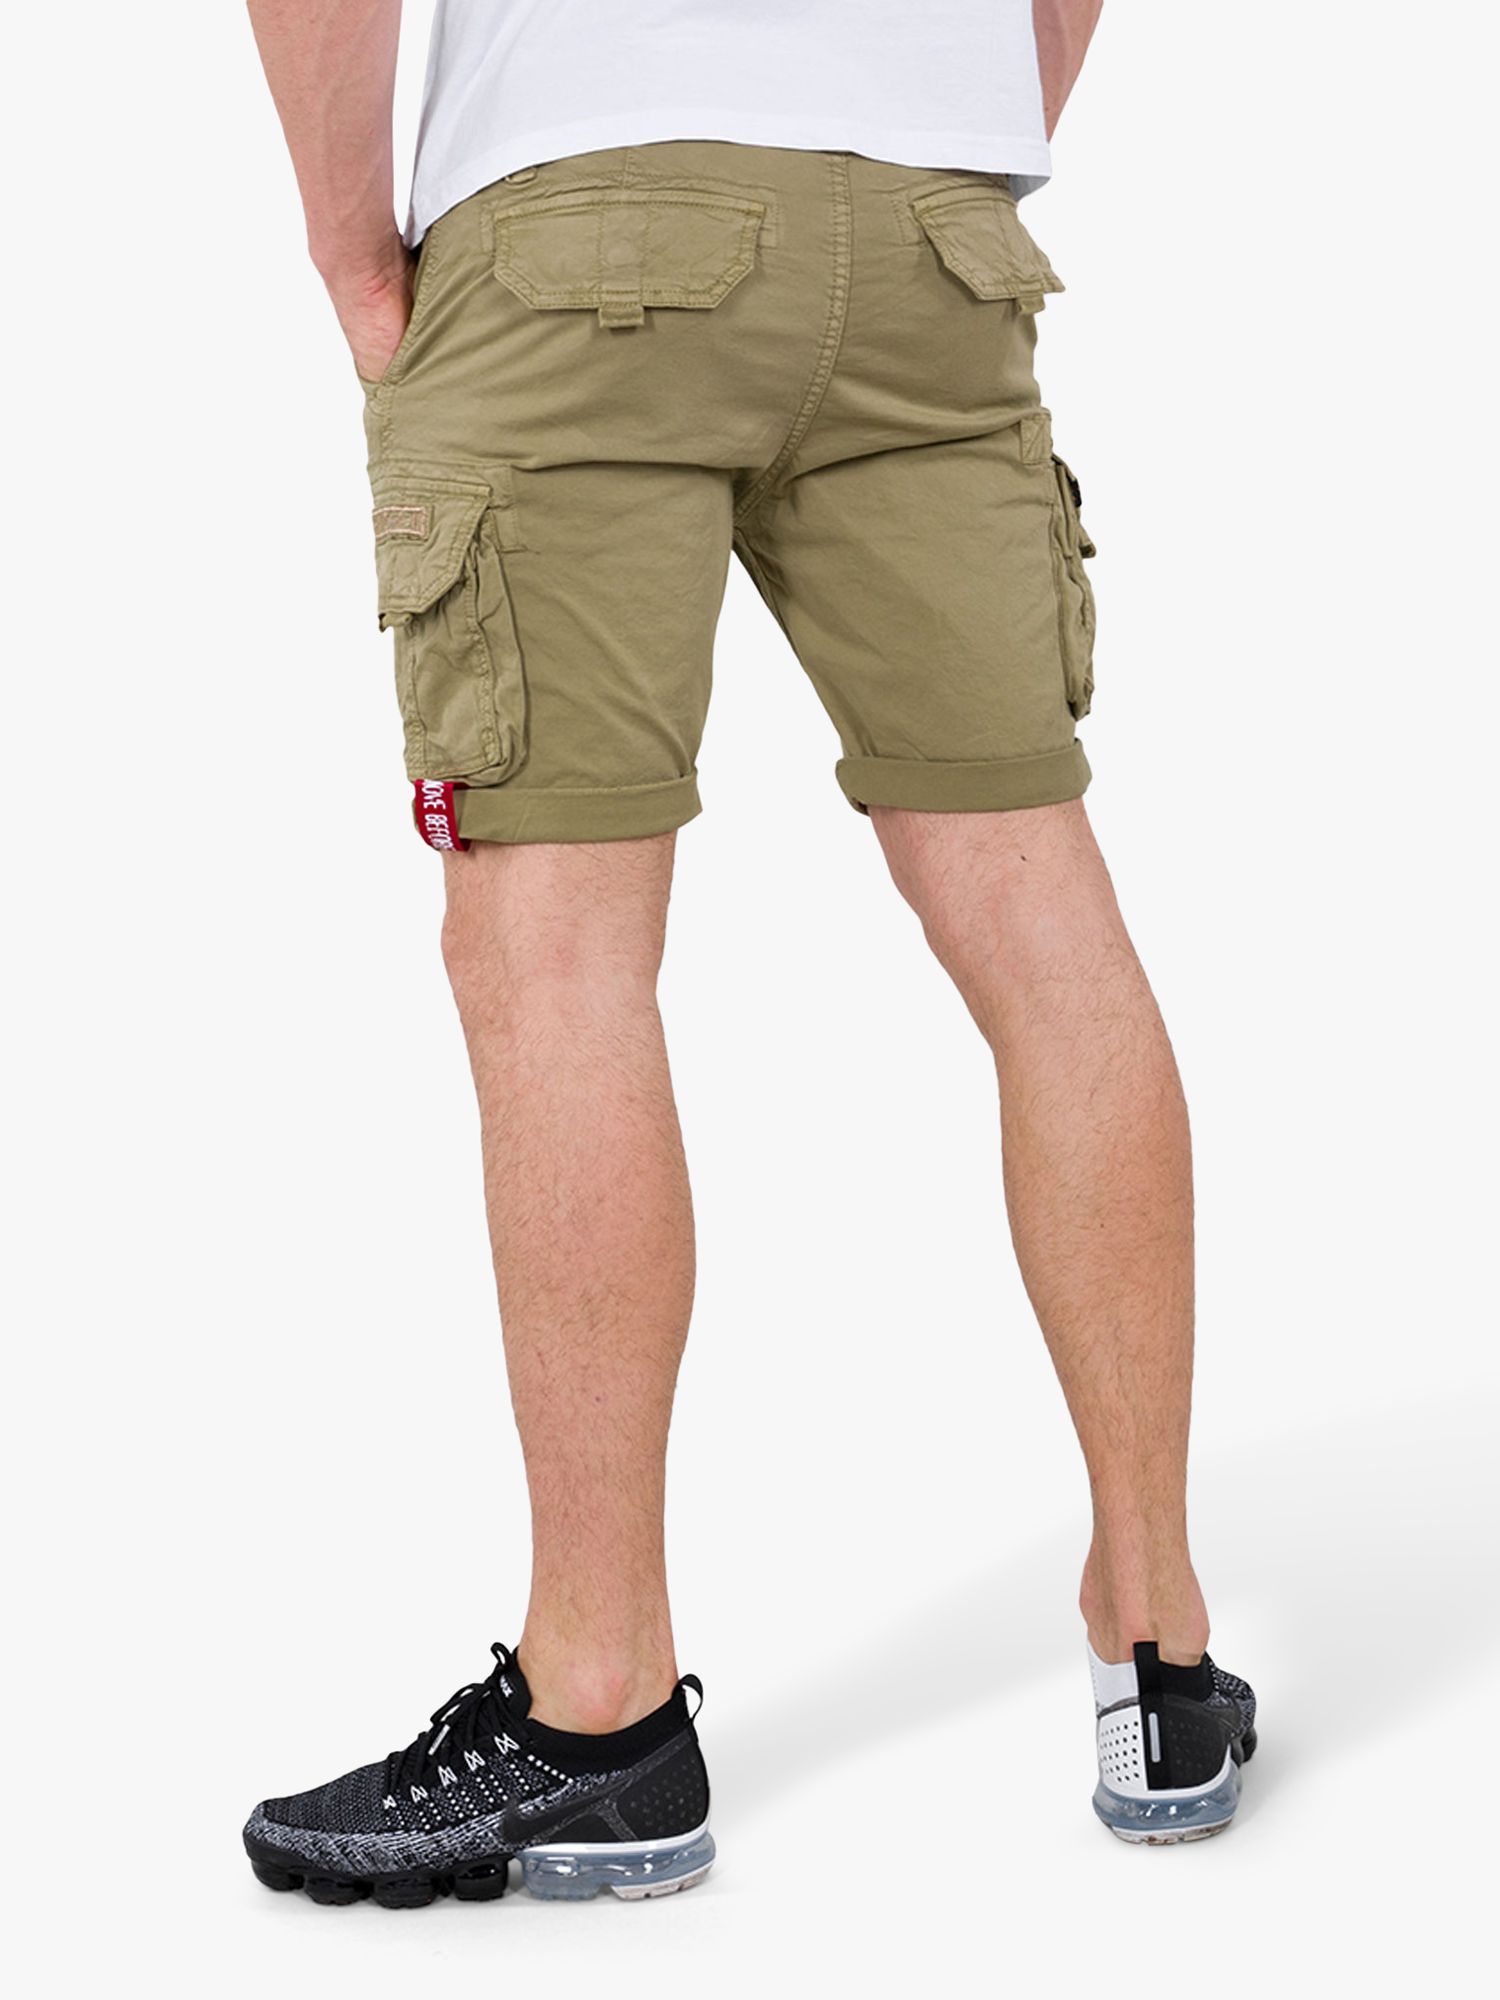 Alpha Industries Crew Cargo & Light Partners John Olive Shorts, 82 at Lewis